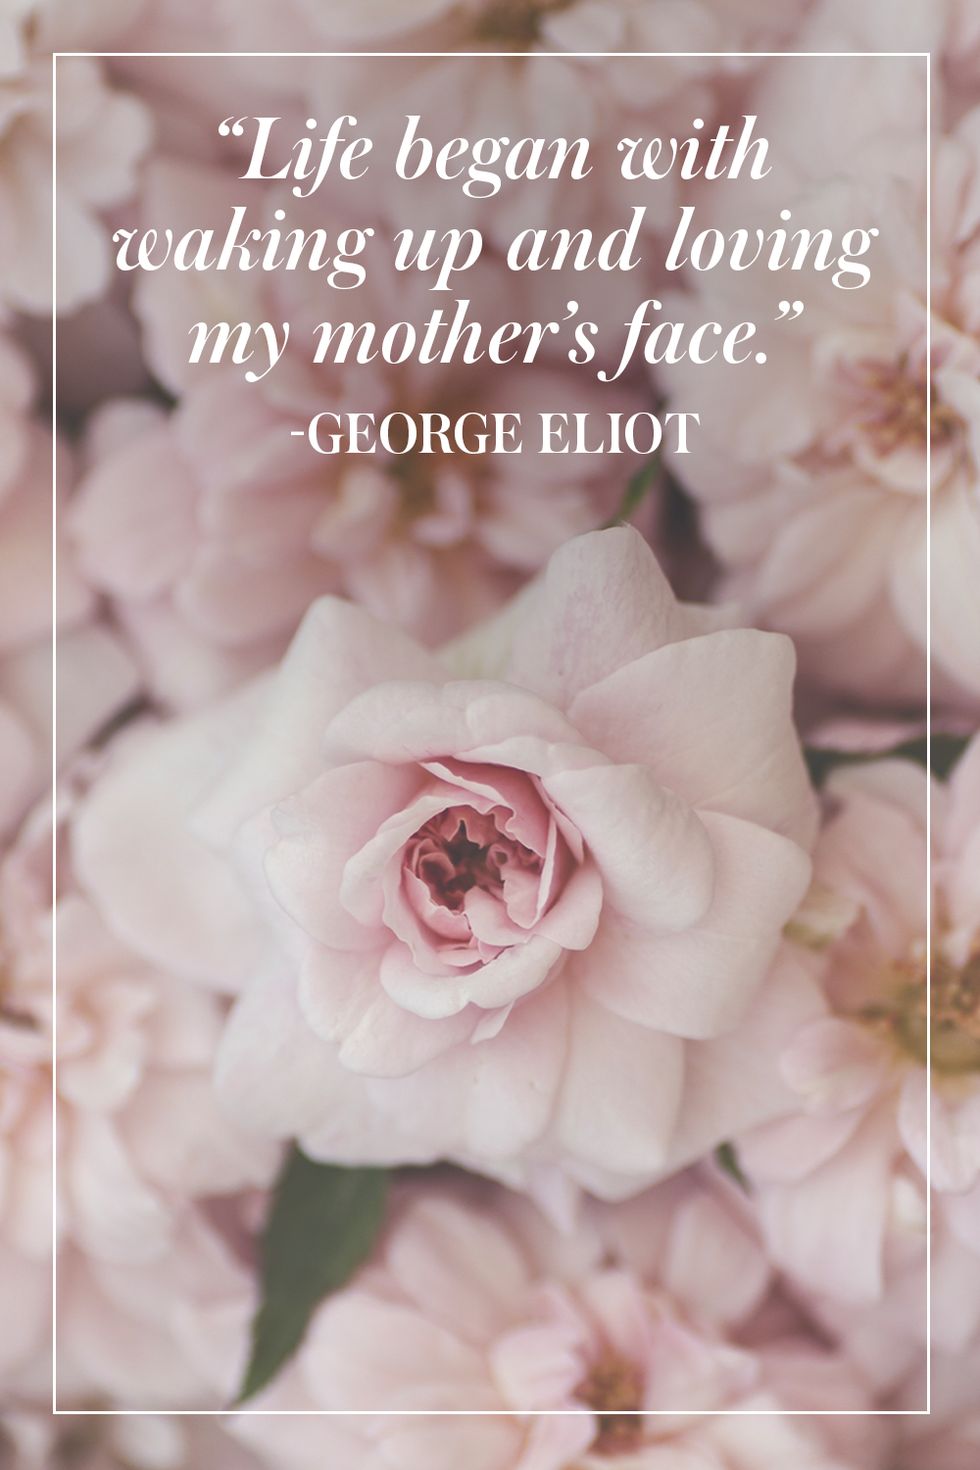 A Good Mom  Inspirational quotes for moms, Mom life quotes